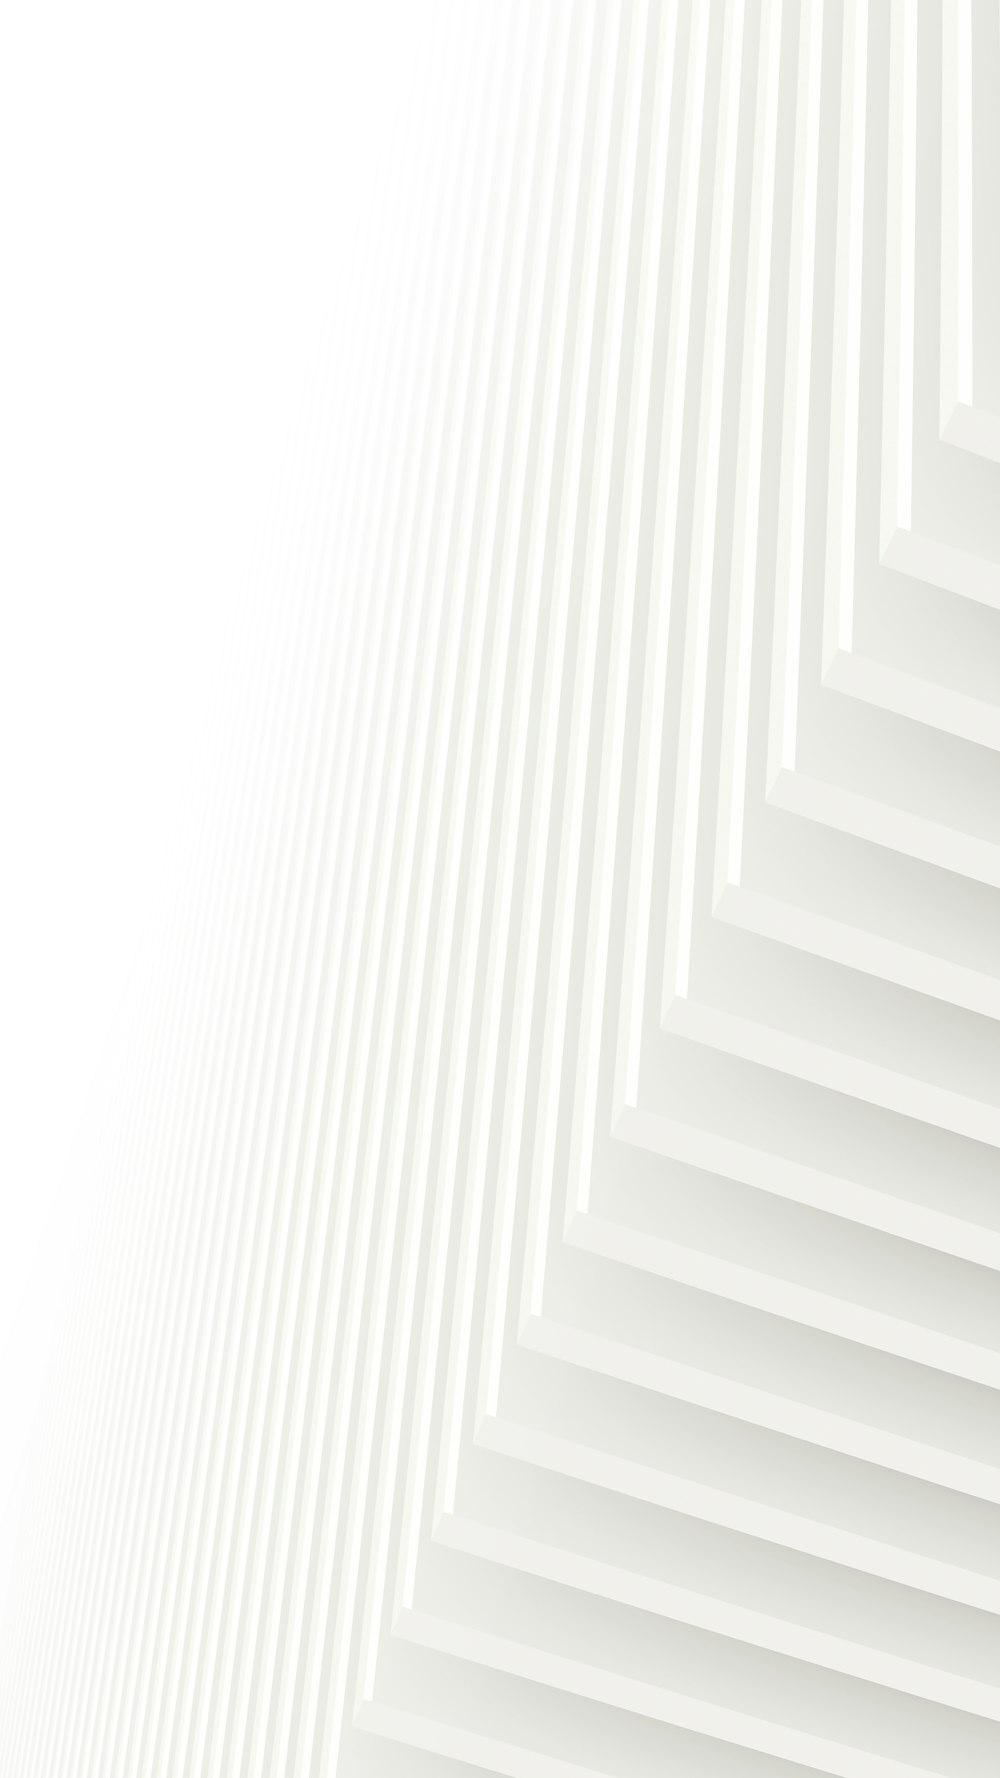 an abstract white background with vertical lines